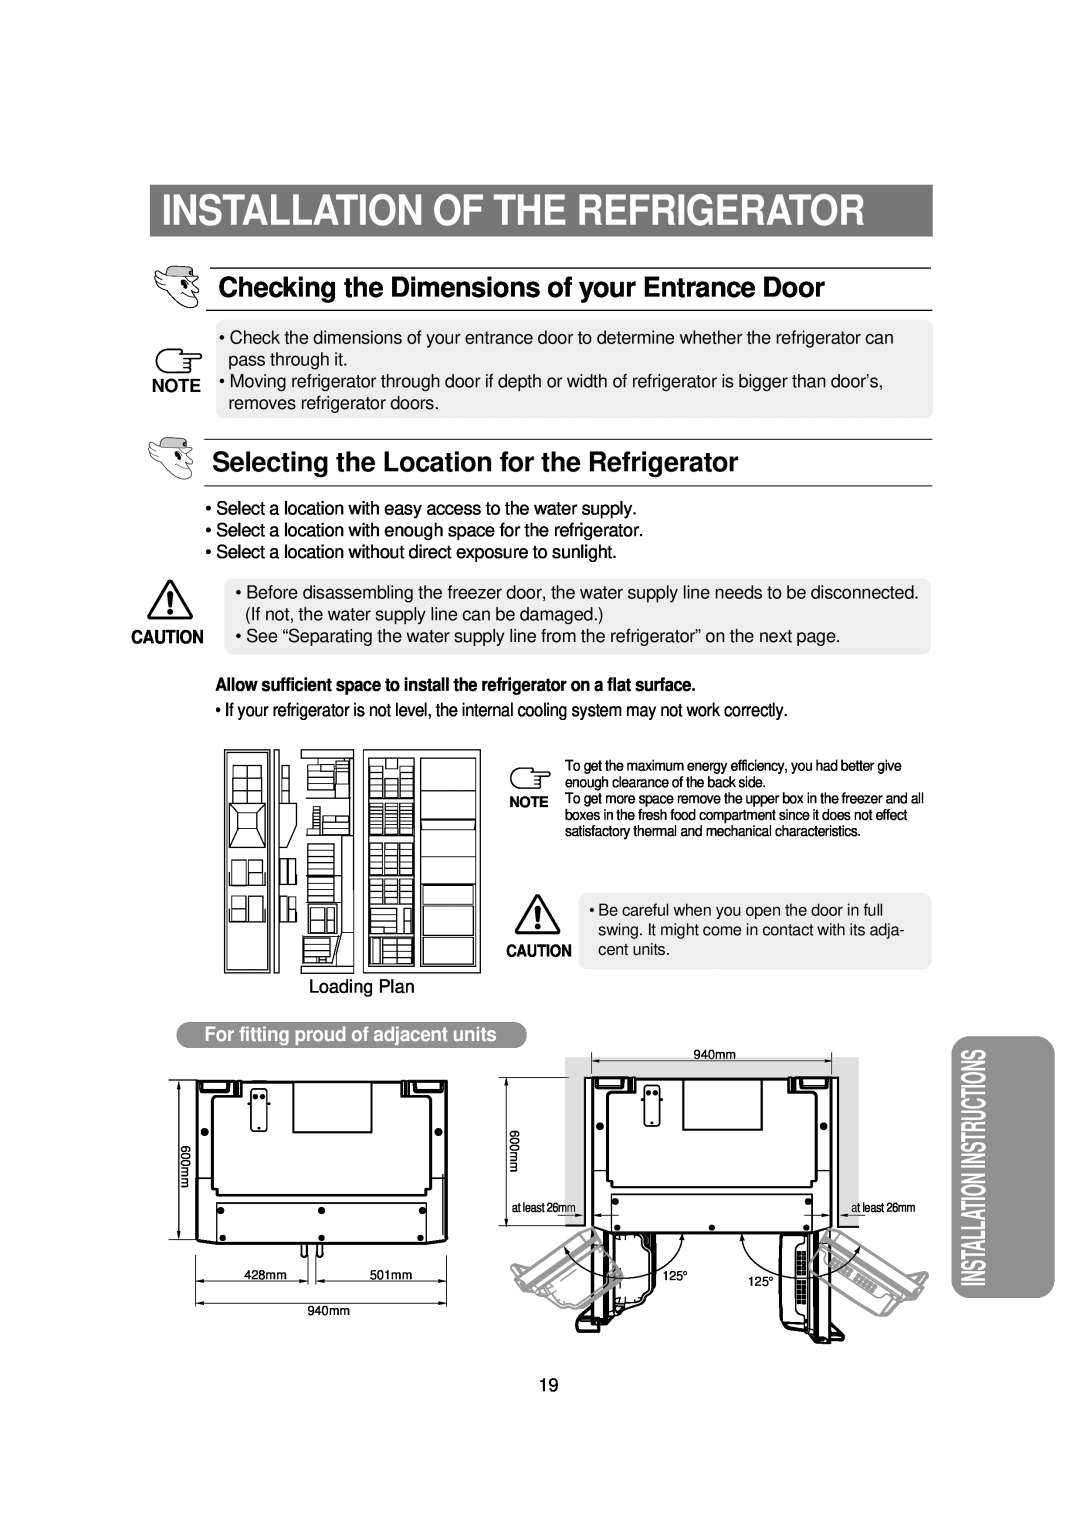 Samsung RSE8B, RSE8N, RSE8F manual Installation Of The Refrigerator, Checking the Dimensions of your Entrance Door 